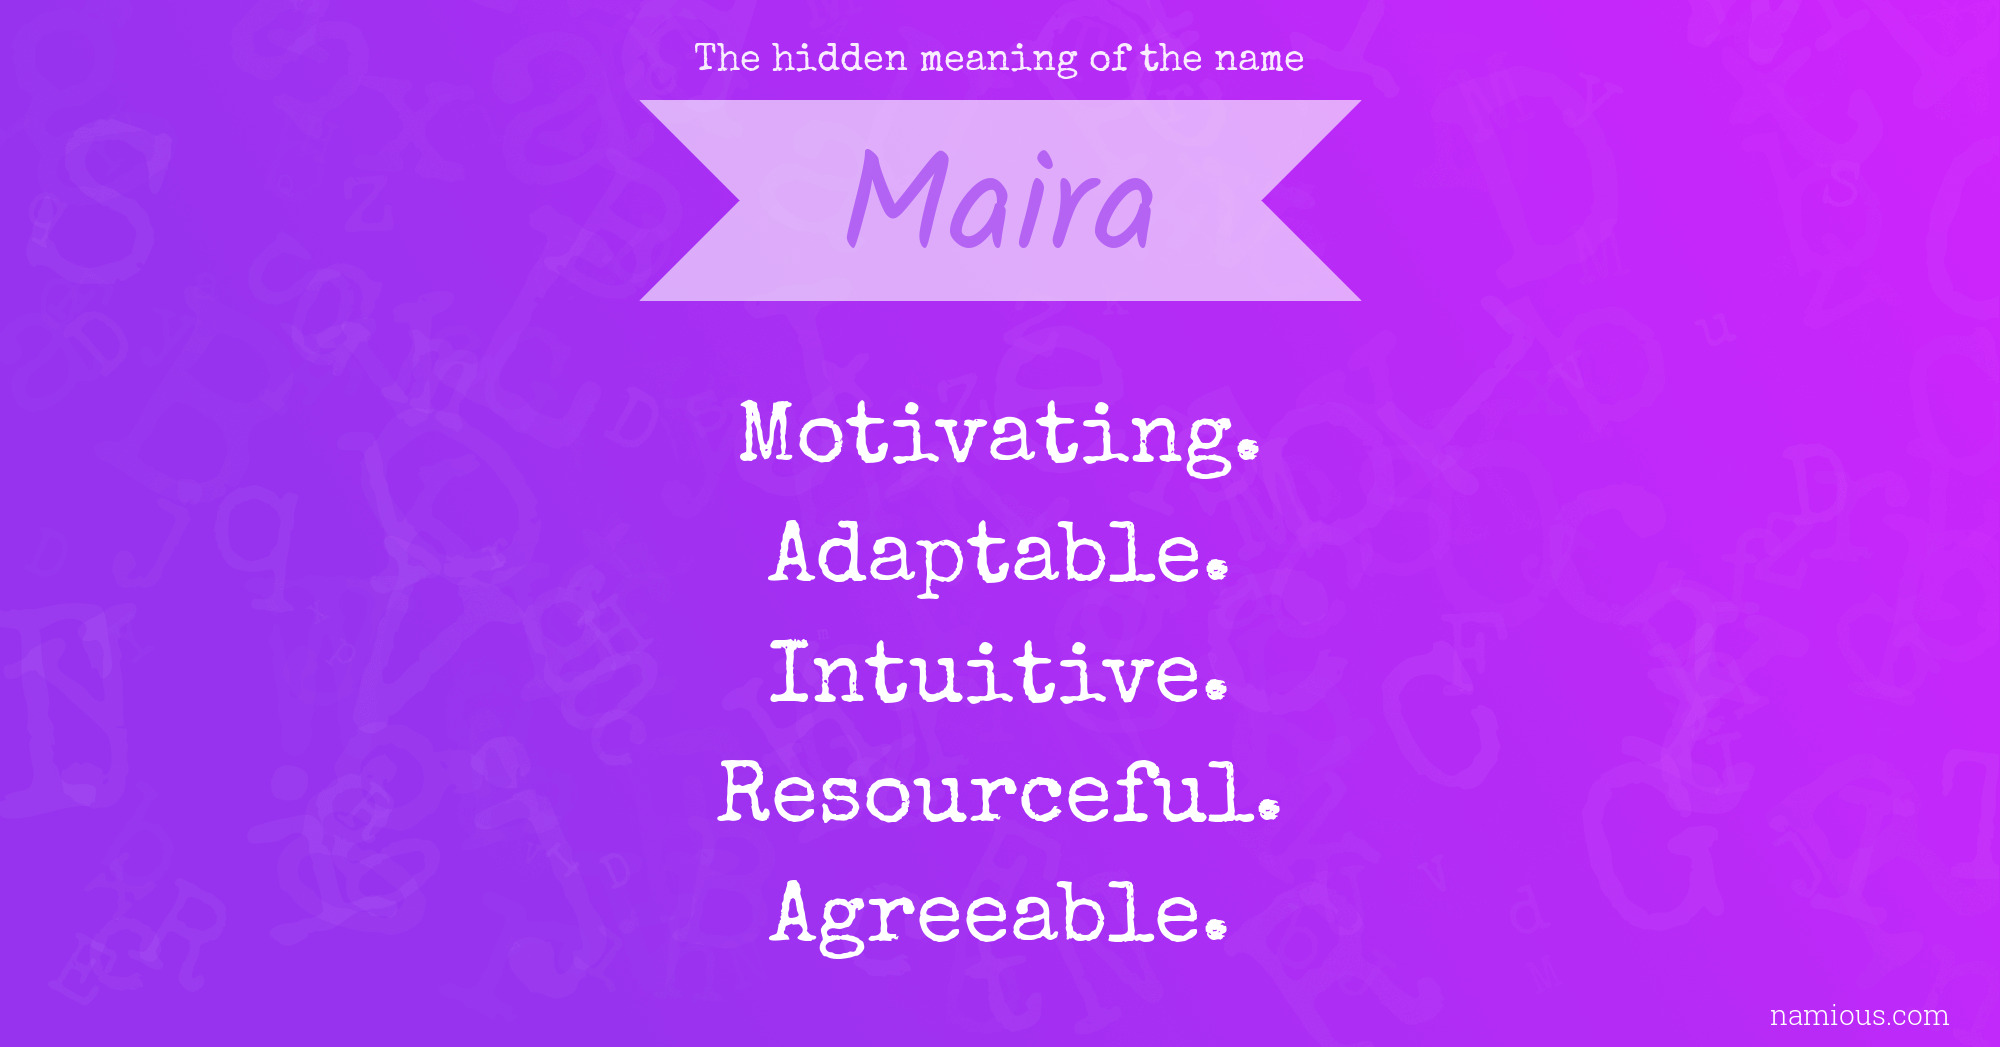 The hidden meaning of the name Maira